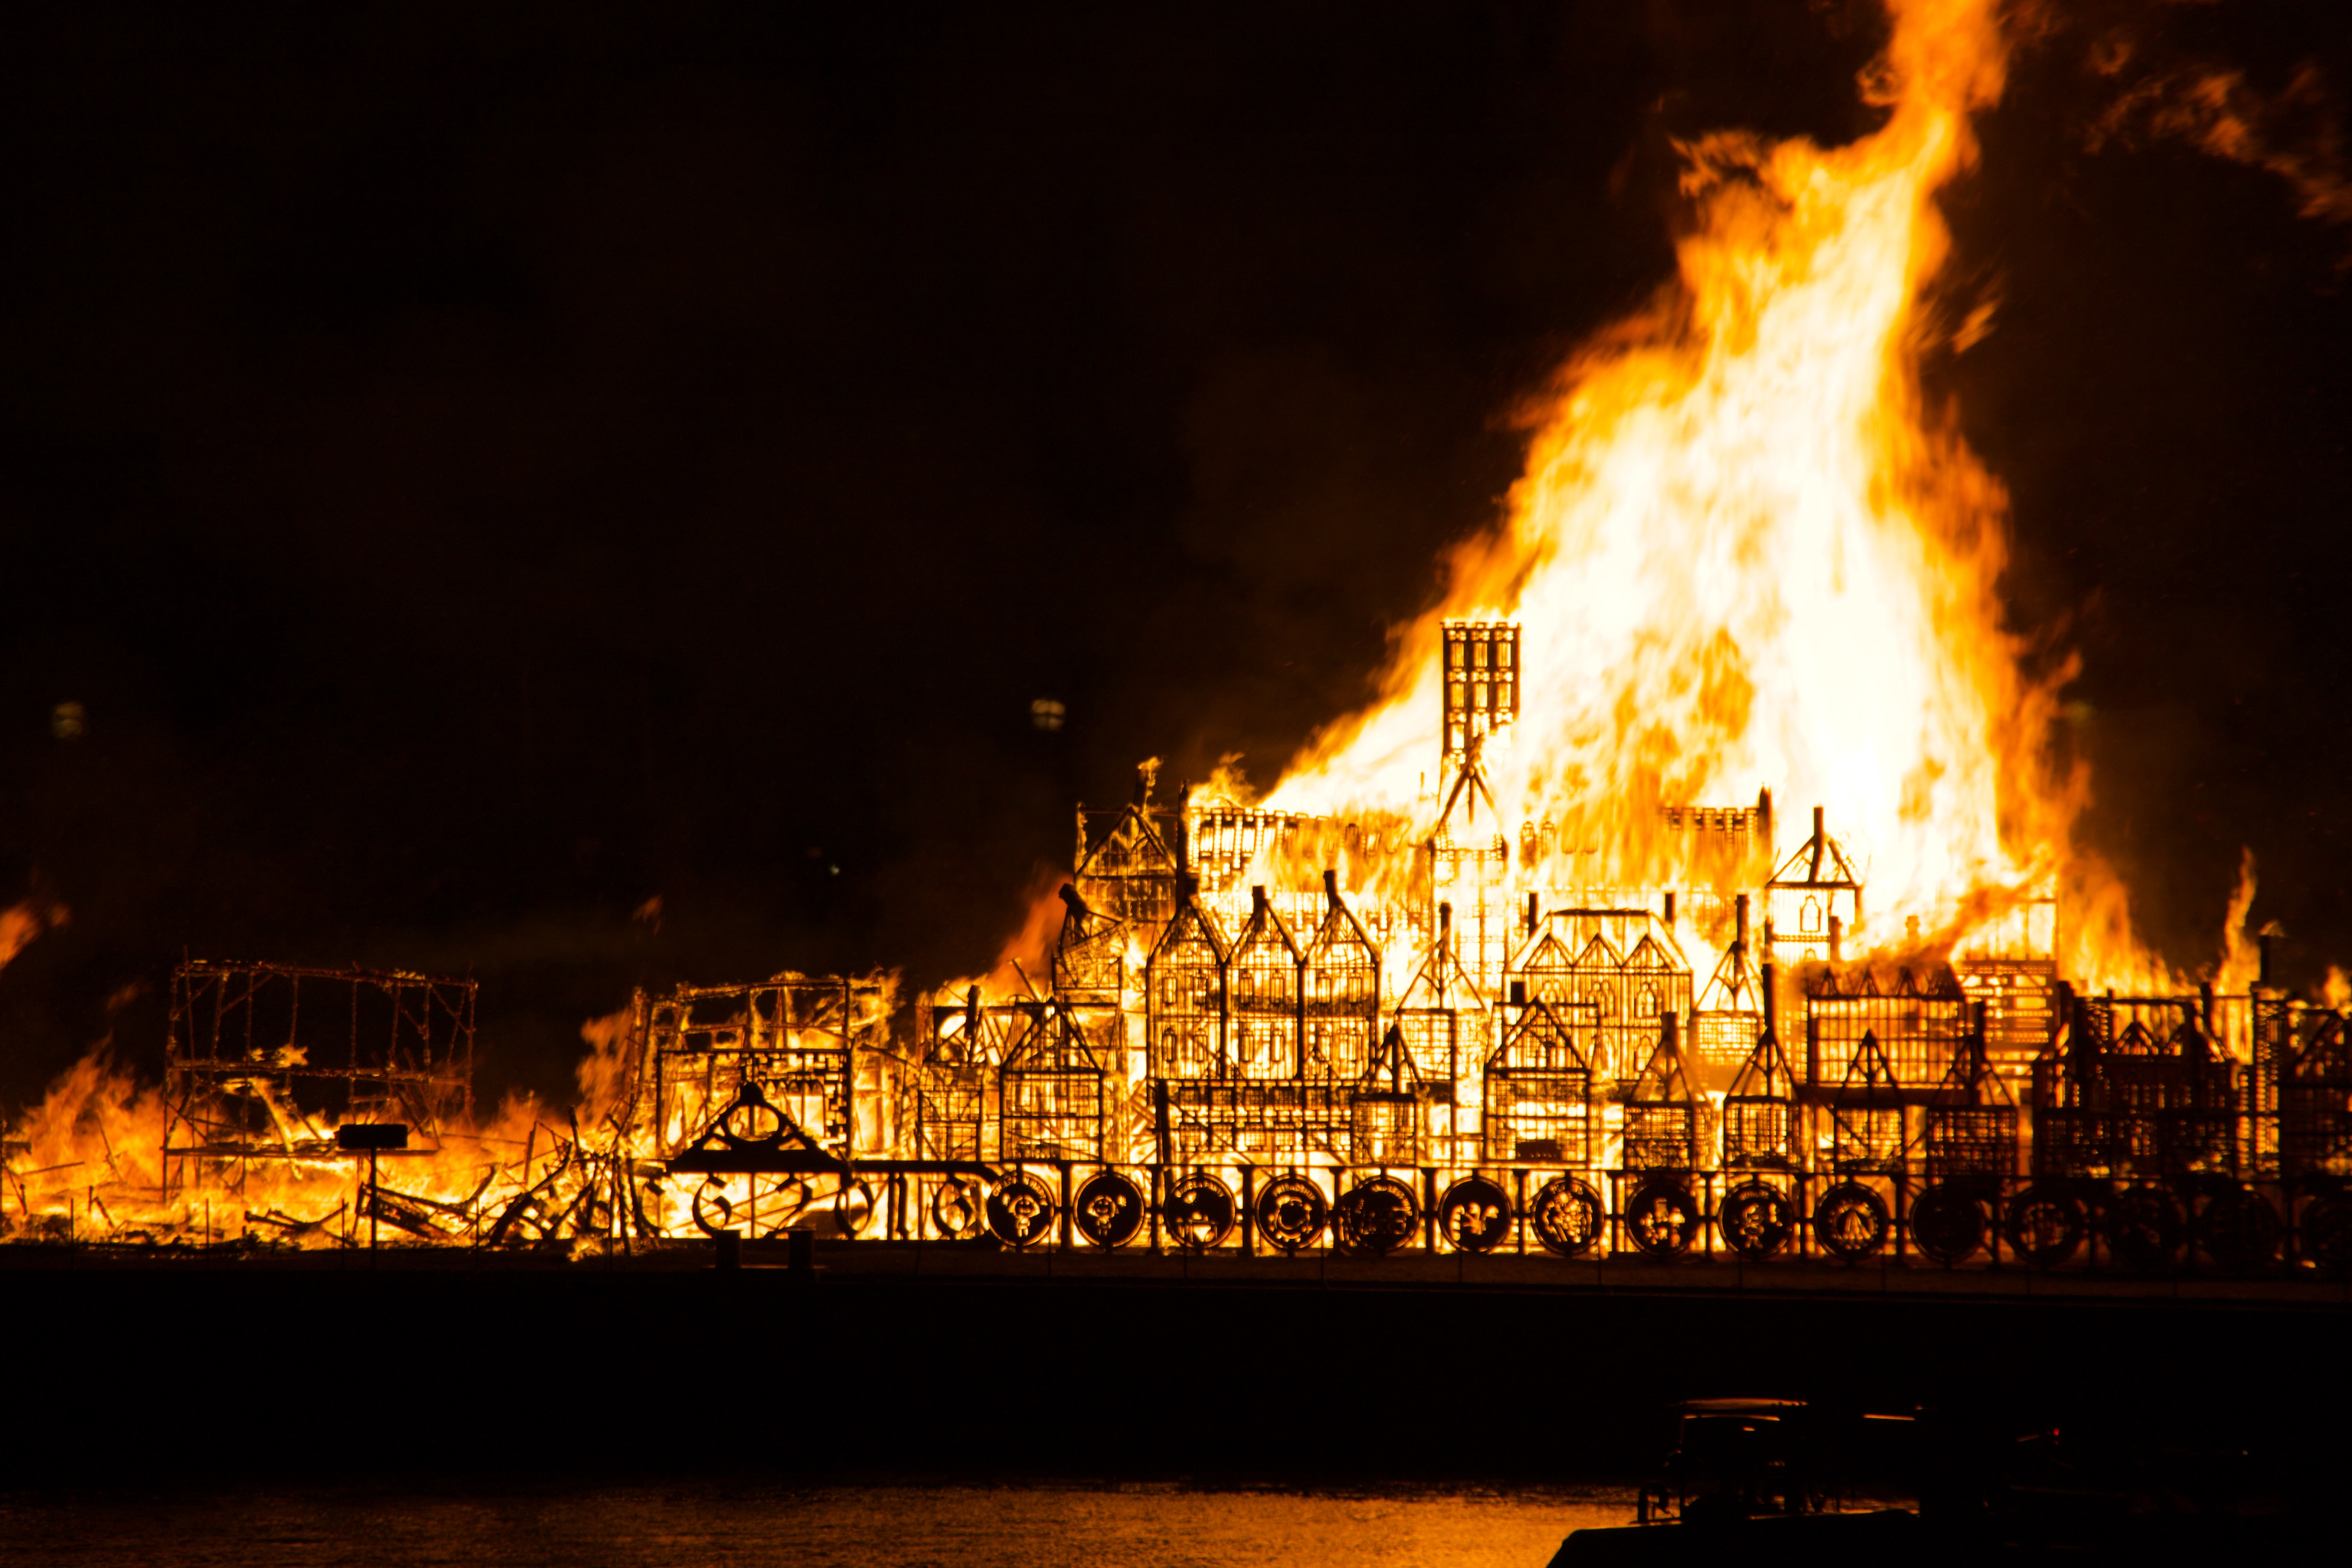 Teaching the Great Fire of London: Activities & Resources for KS1